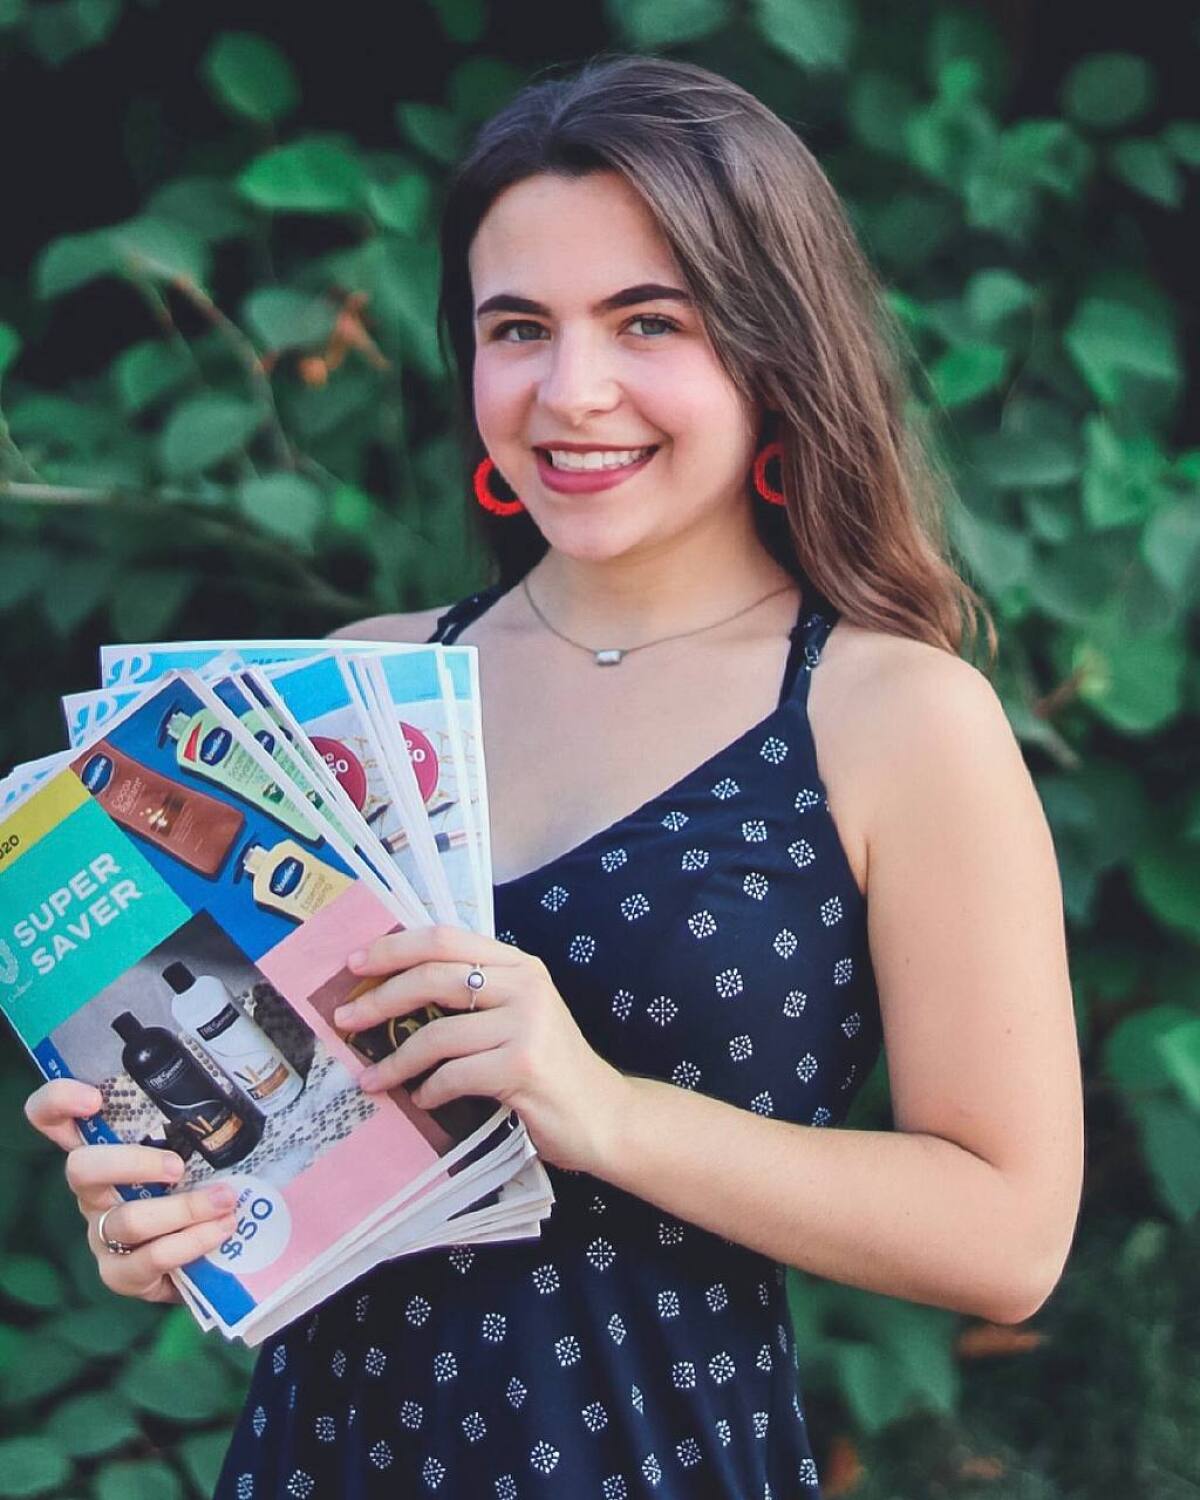 Social media influencer Julia Belkin poses with coupons in front of a wall of greenery.